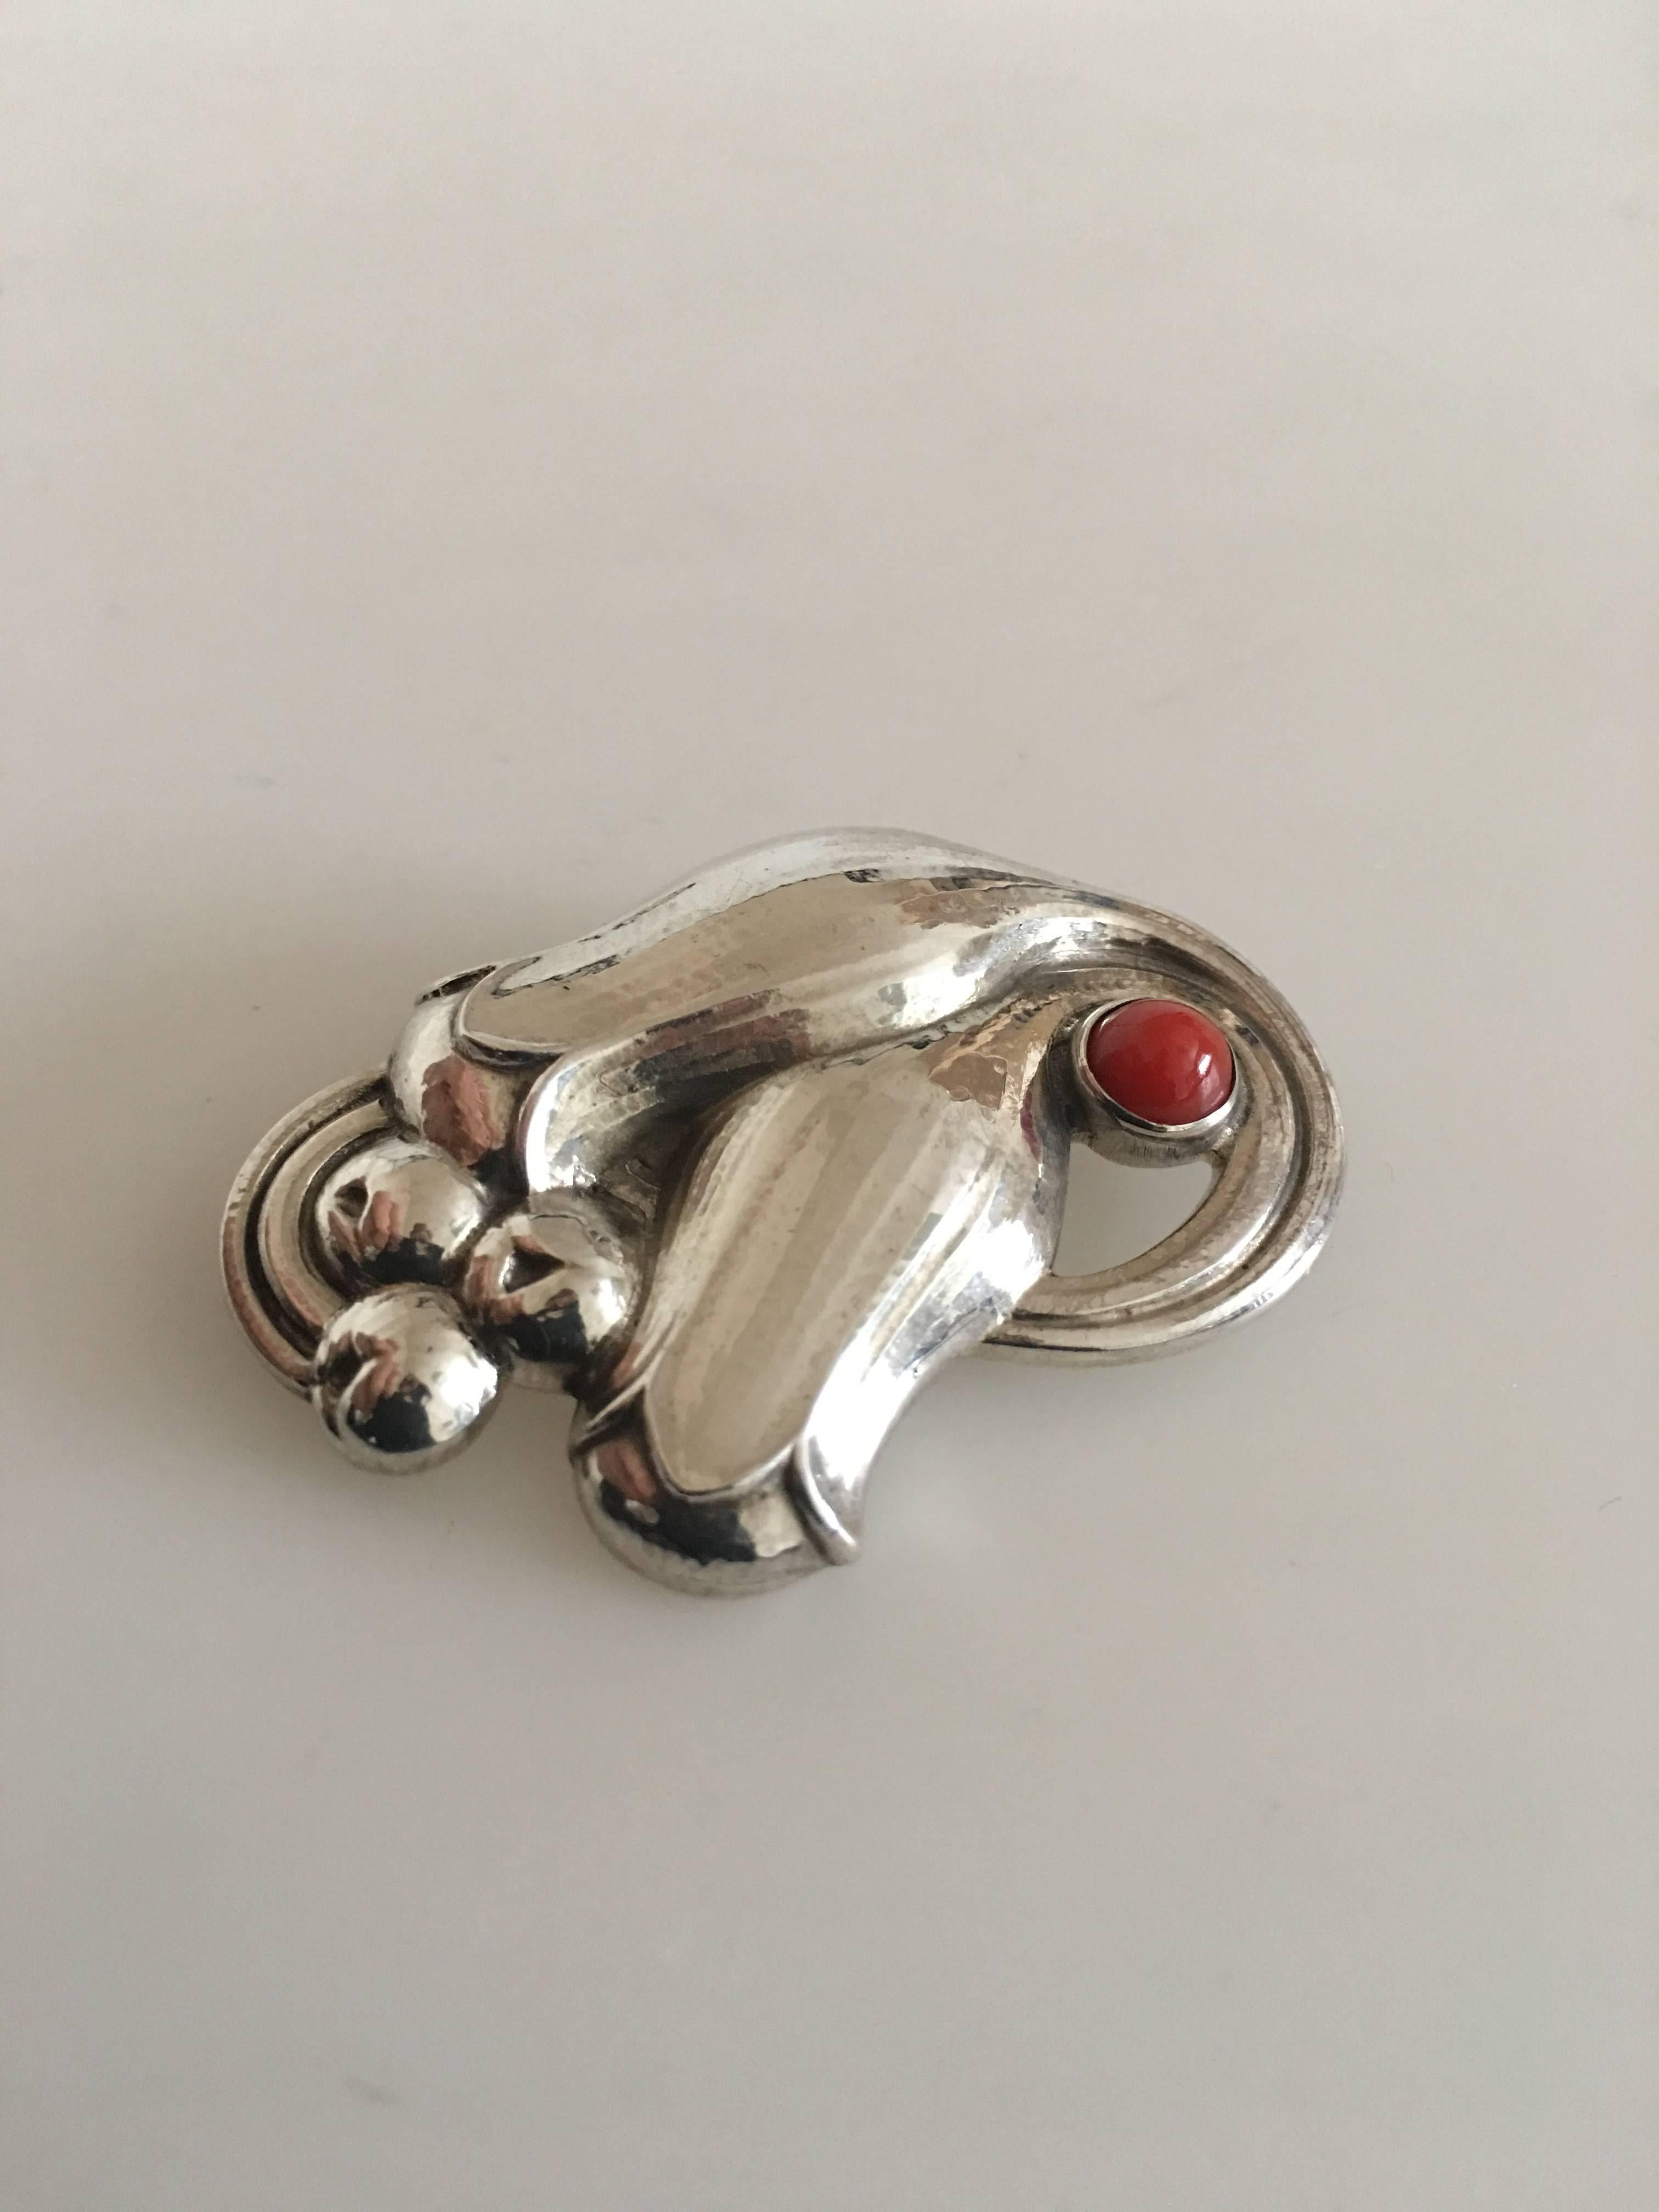 Art Nouveau Georg Jensen Sterling Silver Tulip Brooch #100B with Coral